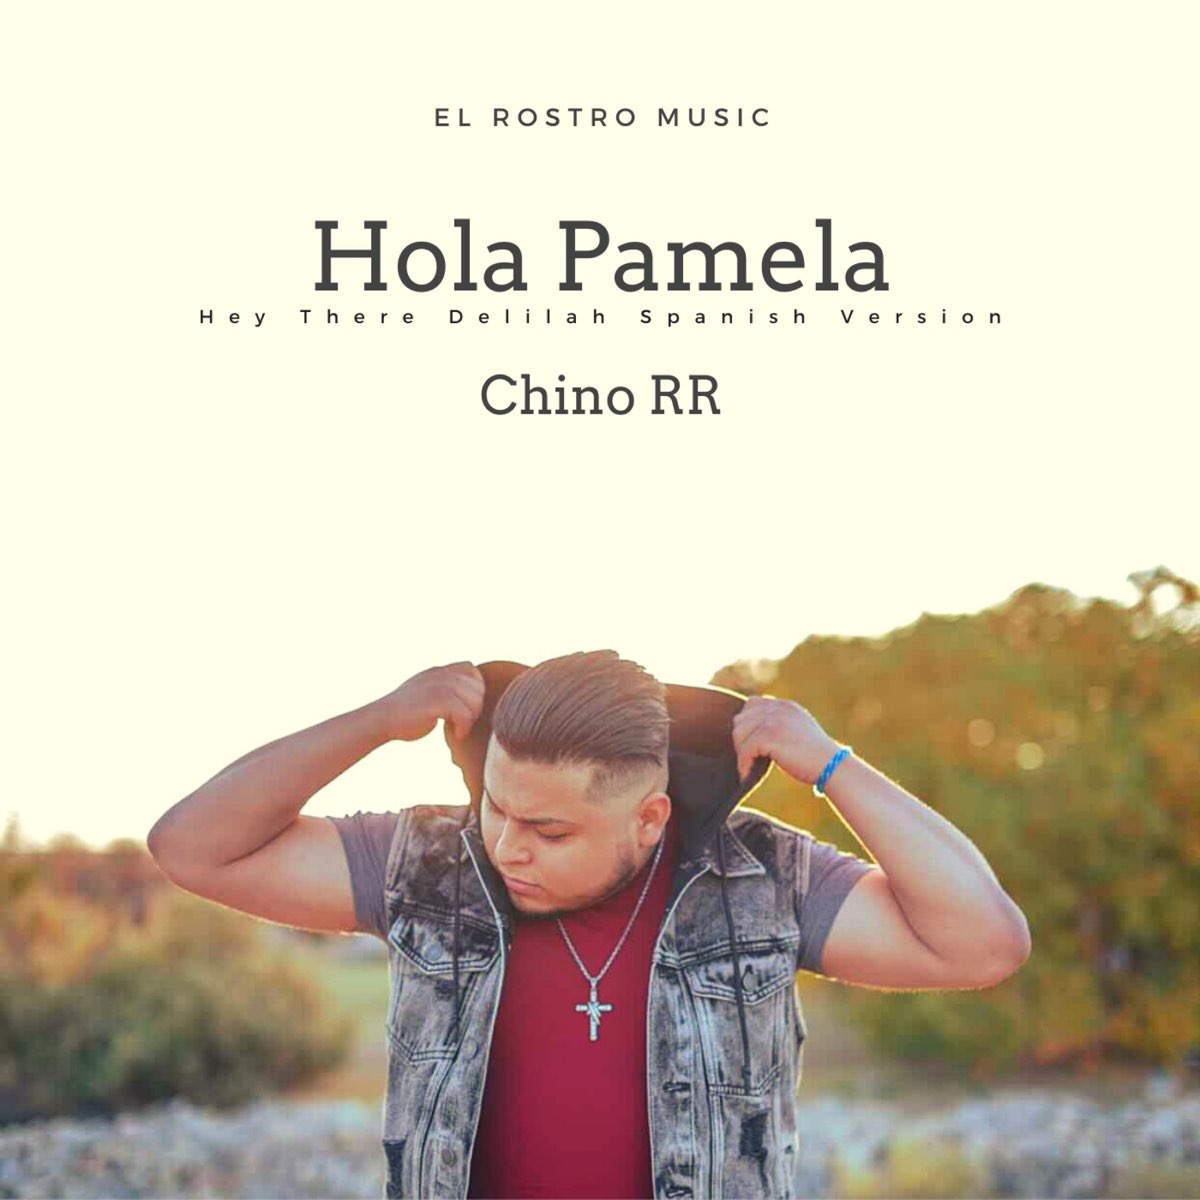 Hey There Delilah (Spanish Version) - Single by Chino RR on Apple Music